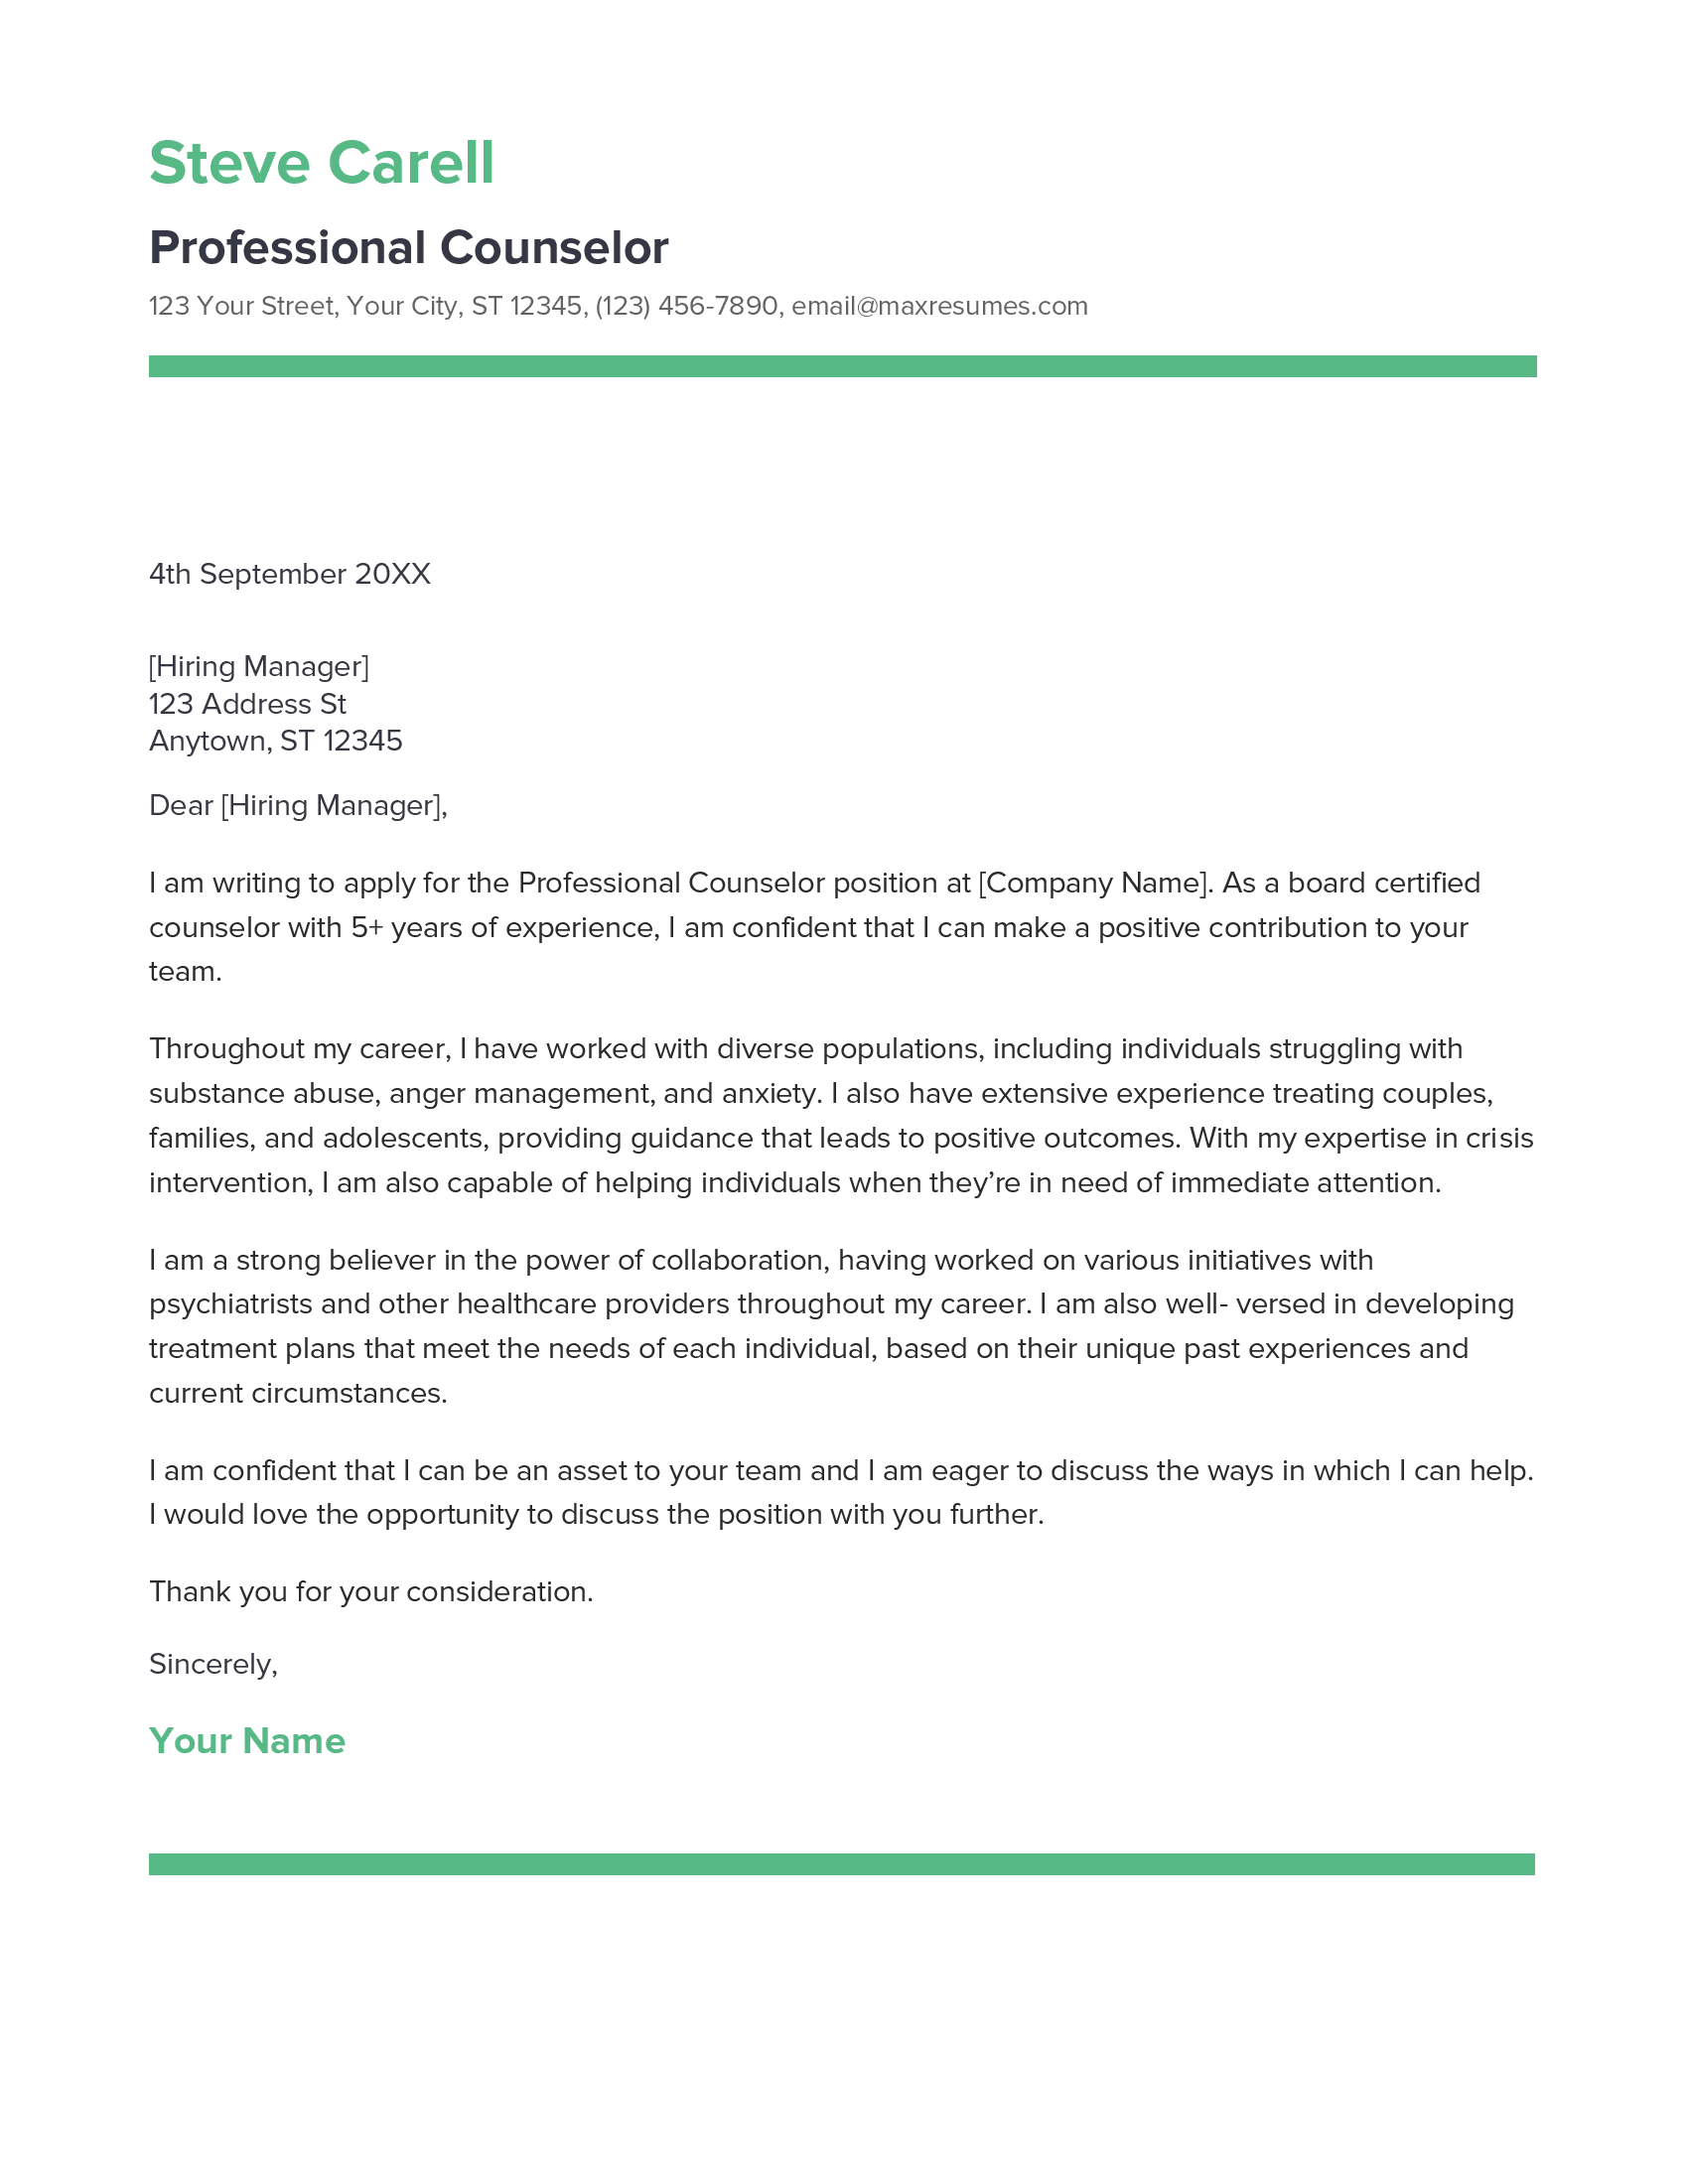 Professional Counselor Cover Letter Example